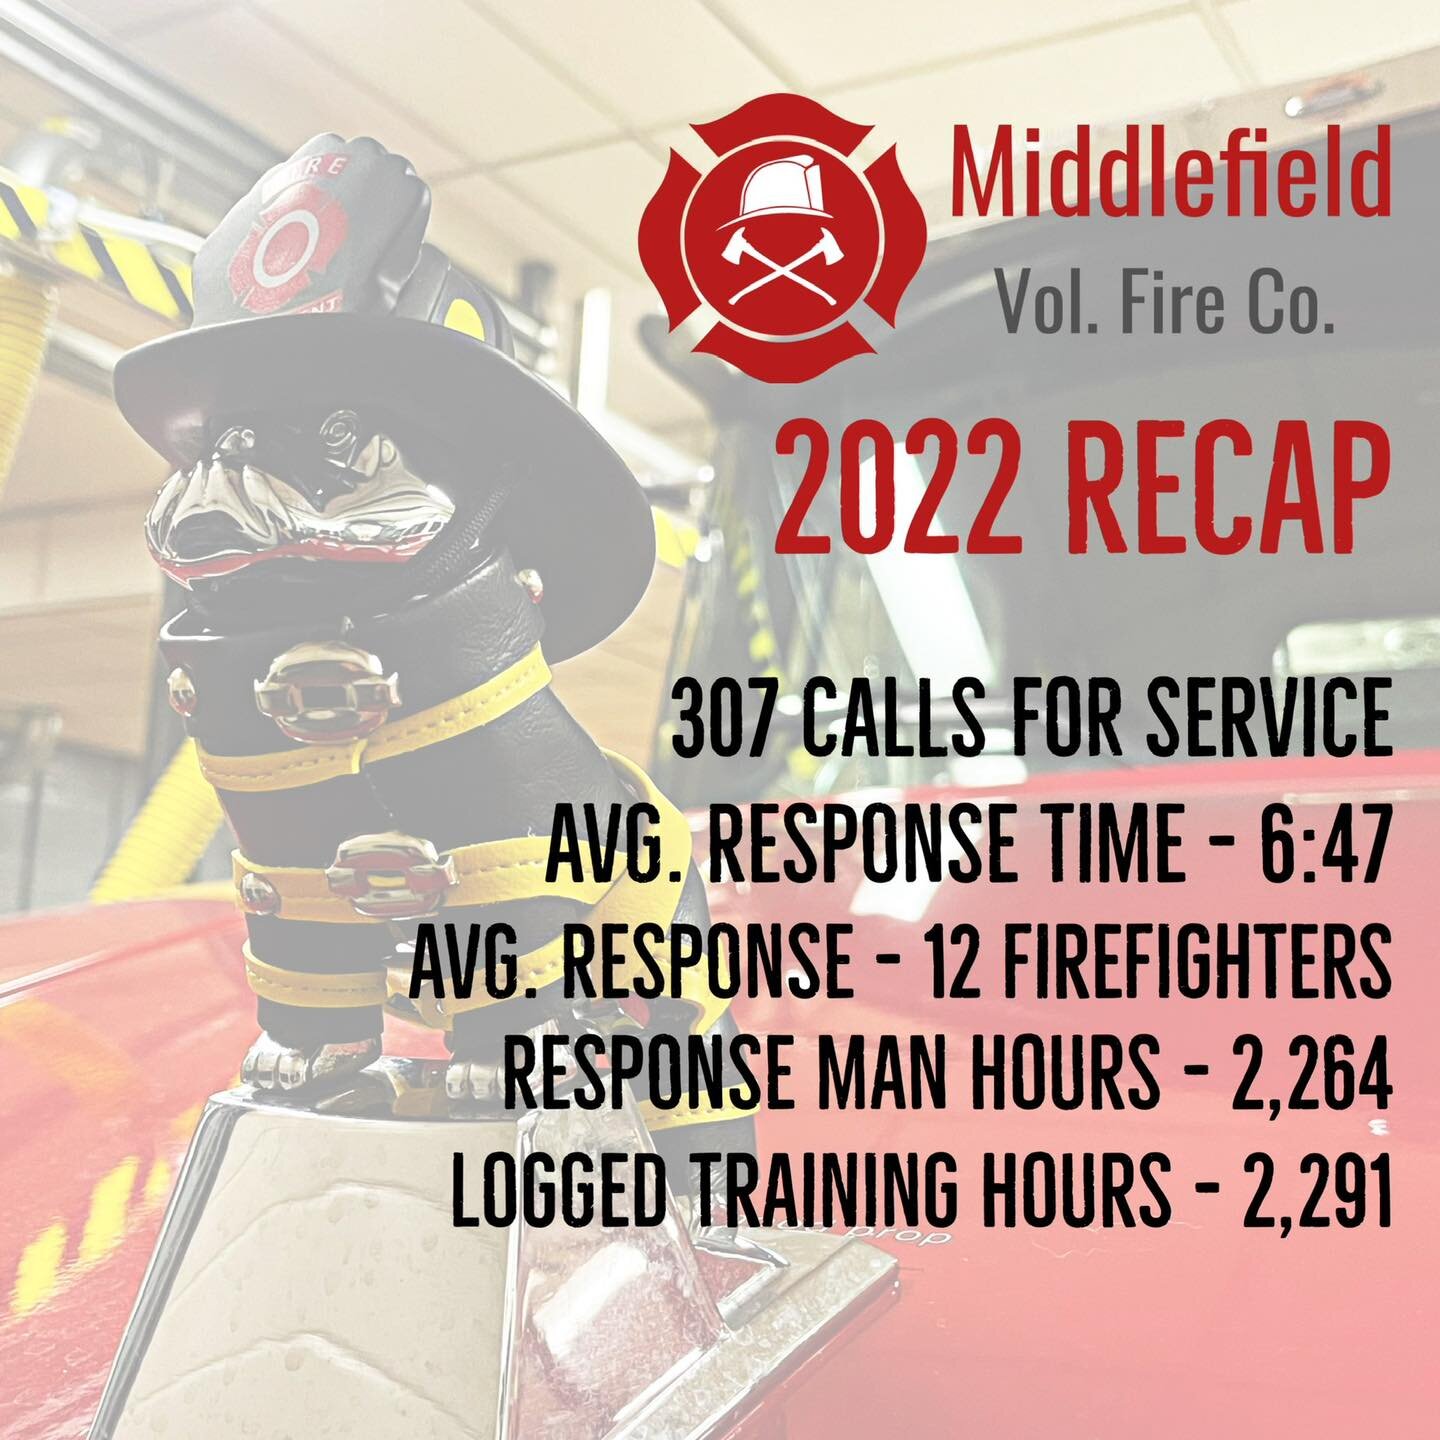 2022 was certainly an active year for us.  There is a lot that goes into this organization to ensure we provide the highest level of service possible to our town. While these are documented statistics and counts, there are hundreds to thousands of ad